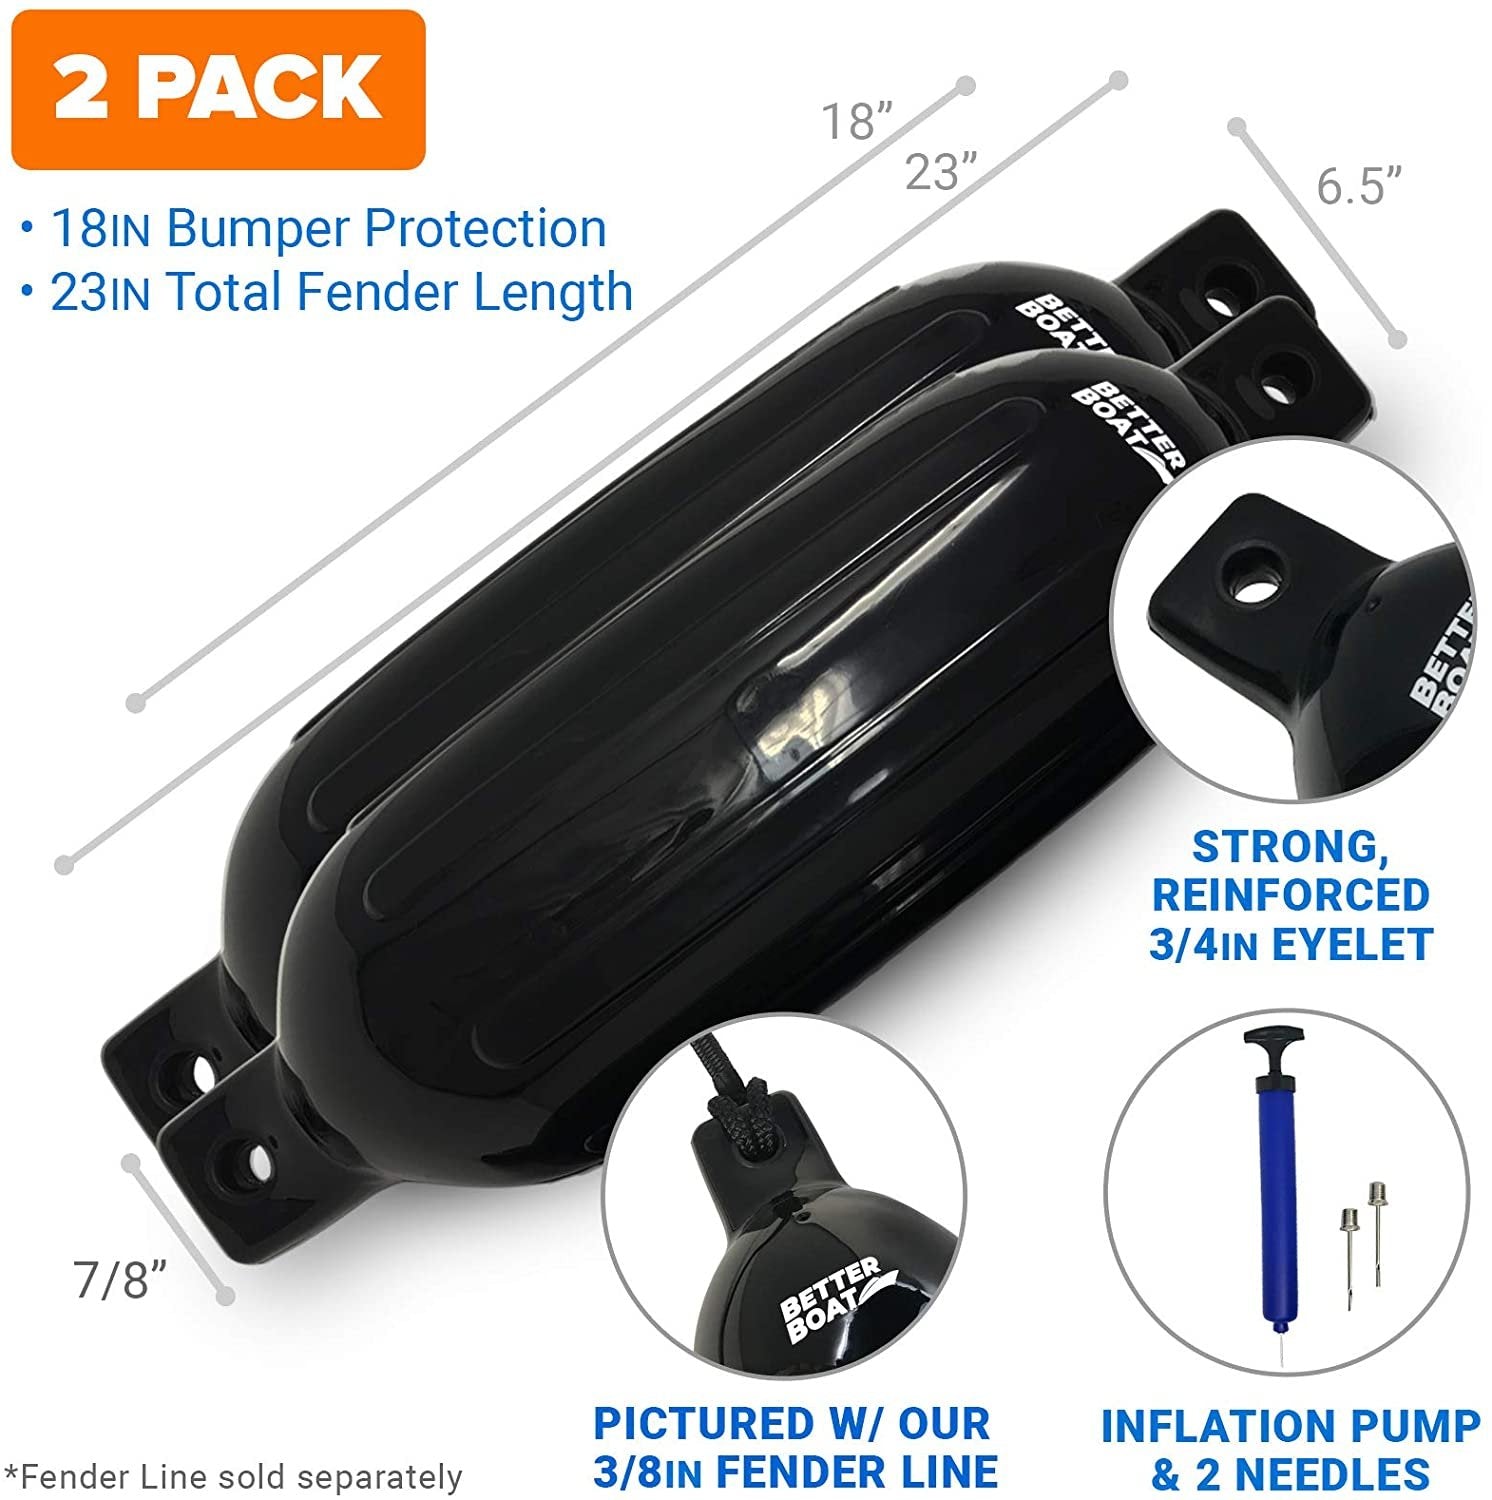 2 Pack Boat Fenders for Docking Boat Bumpers for Docking with Pump Boat Accessories Boat Dock Bumpers Set Buoys Pontoons Buoy Inflatable Fender Marine Bouys 23" x 6.5" Black Blue or White